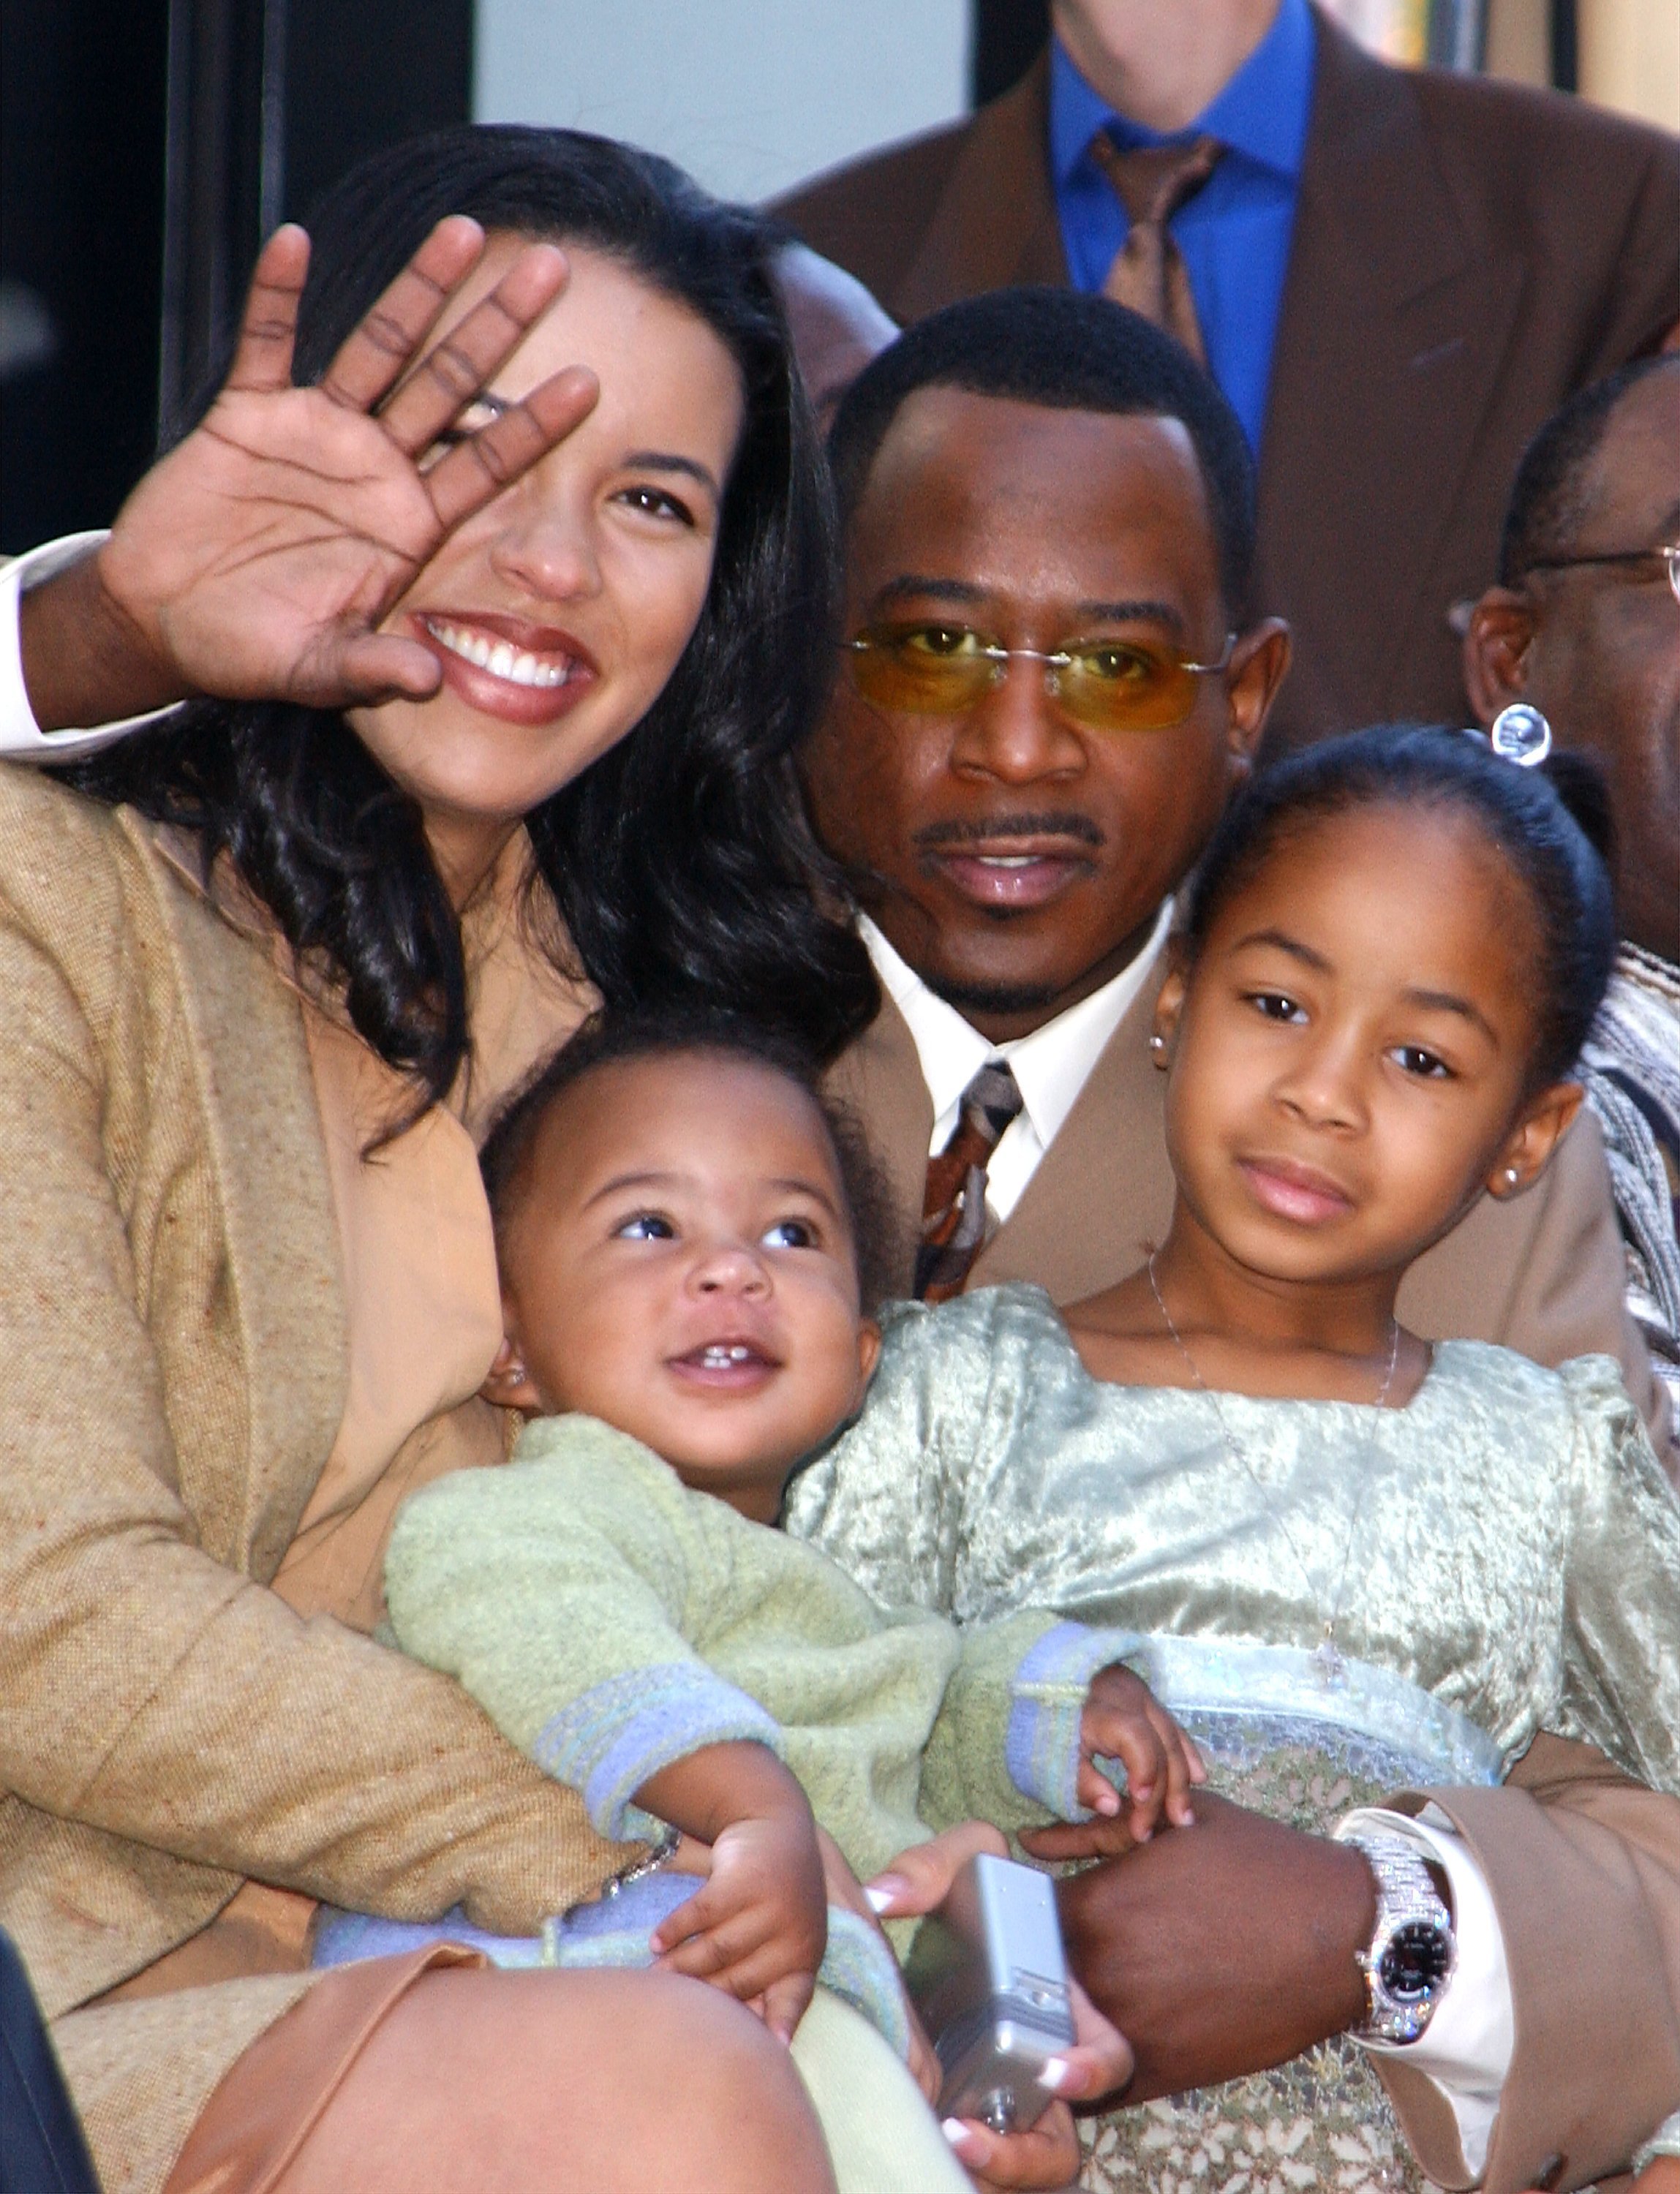 Shamicka Gibbs, Martin Lawrence, and daughters Jasmine and Iyana on November 19, 2001, at Grauman's Chinese Theatre in Hollywood, California | Source: Getty Images